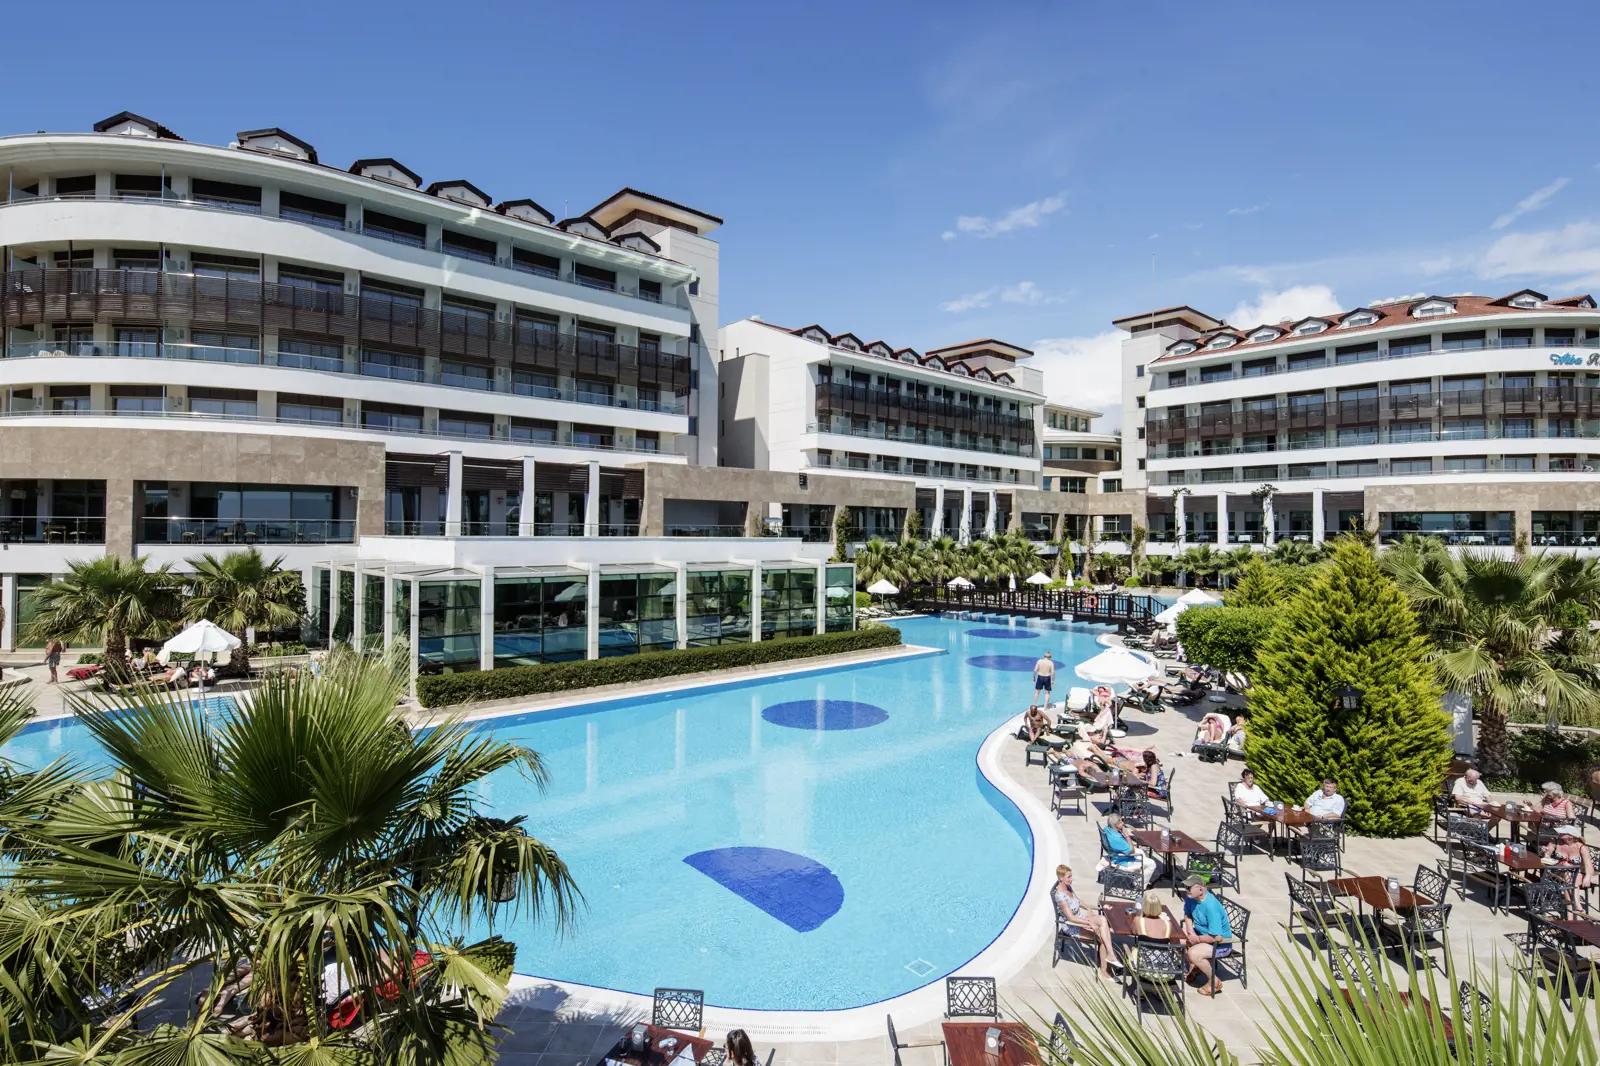 Adults Only hotels in Turkije: onze top 9